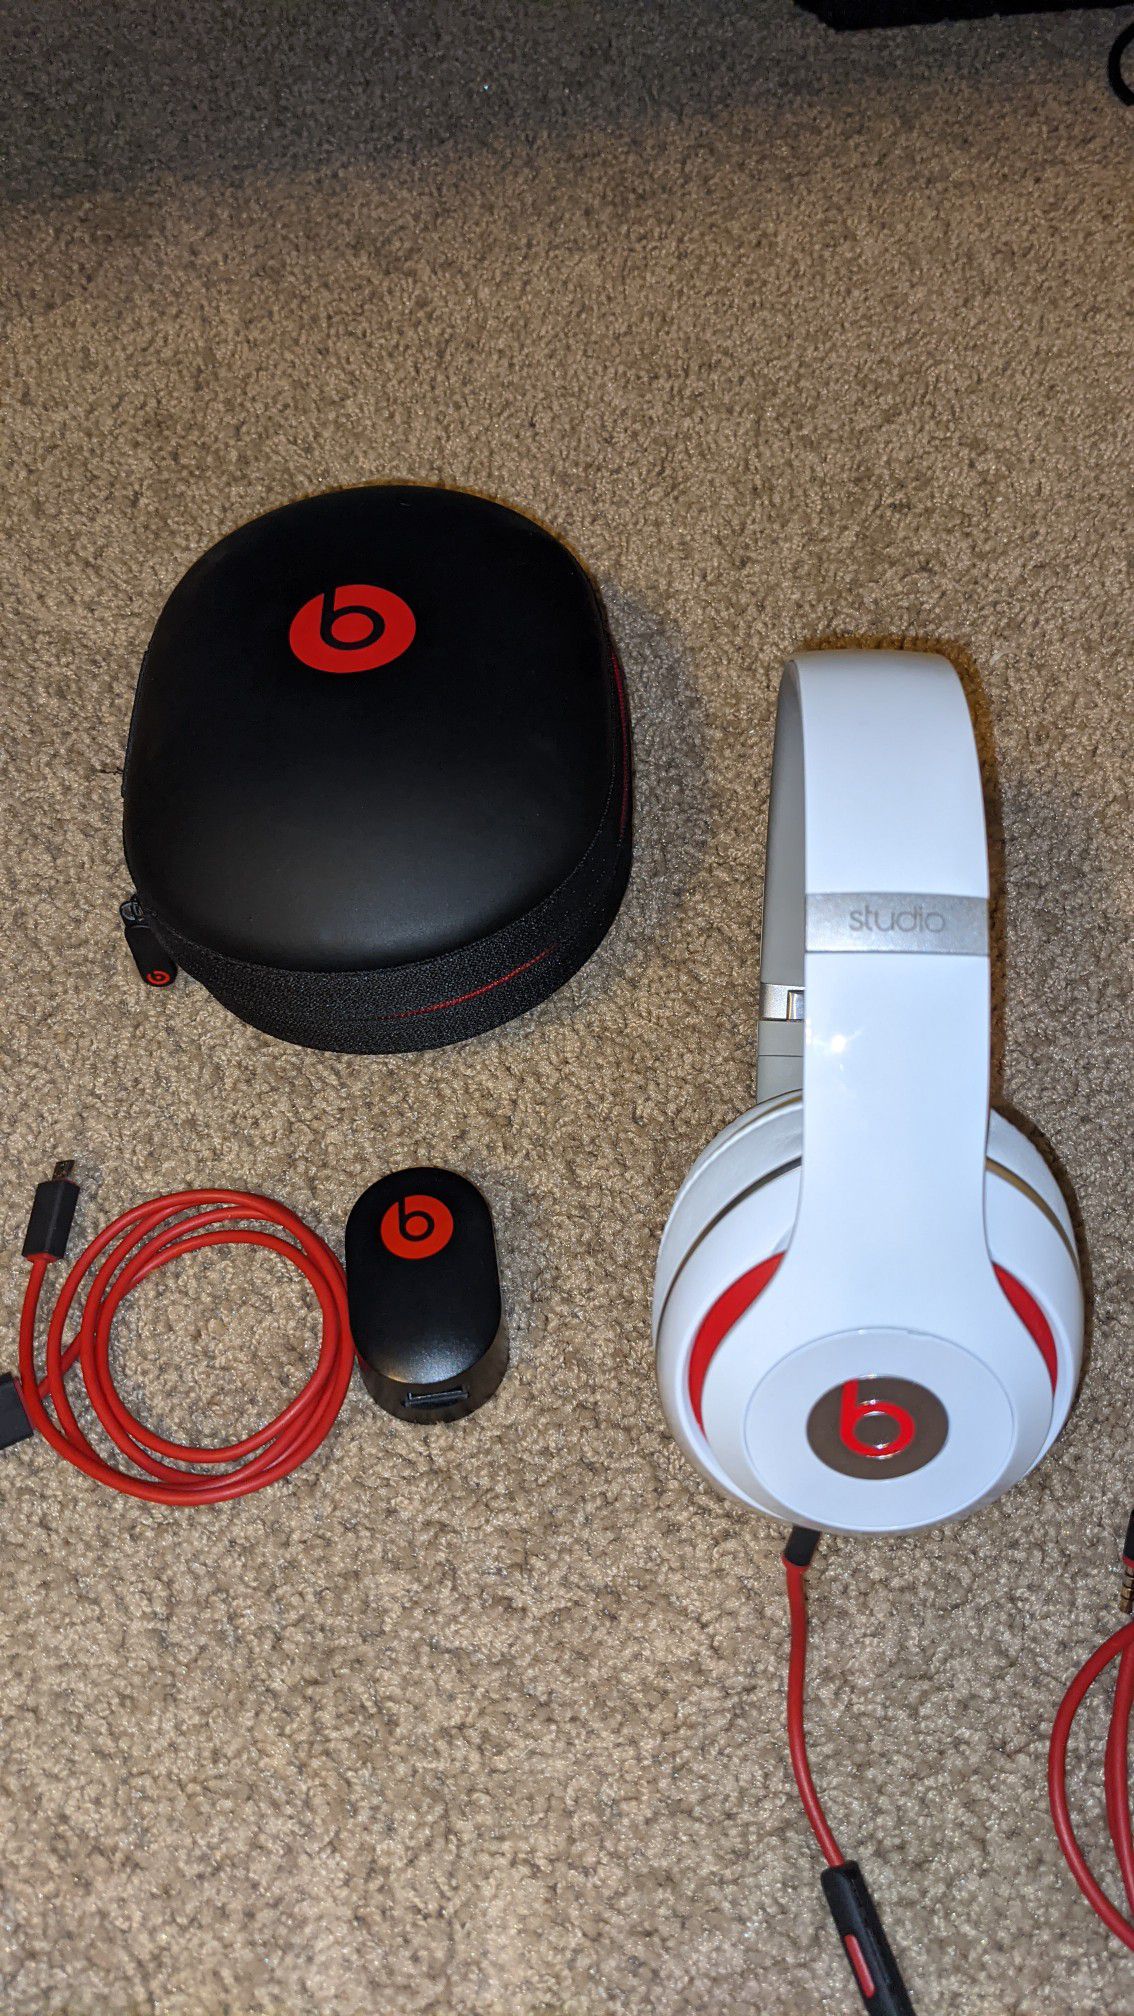 Beats Studio 2.0 - Over the ear, WIRED, noise cancelling headphones. Did I Mention They Are WIRED